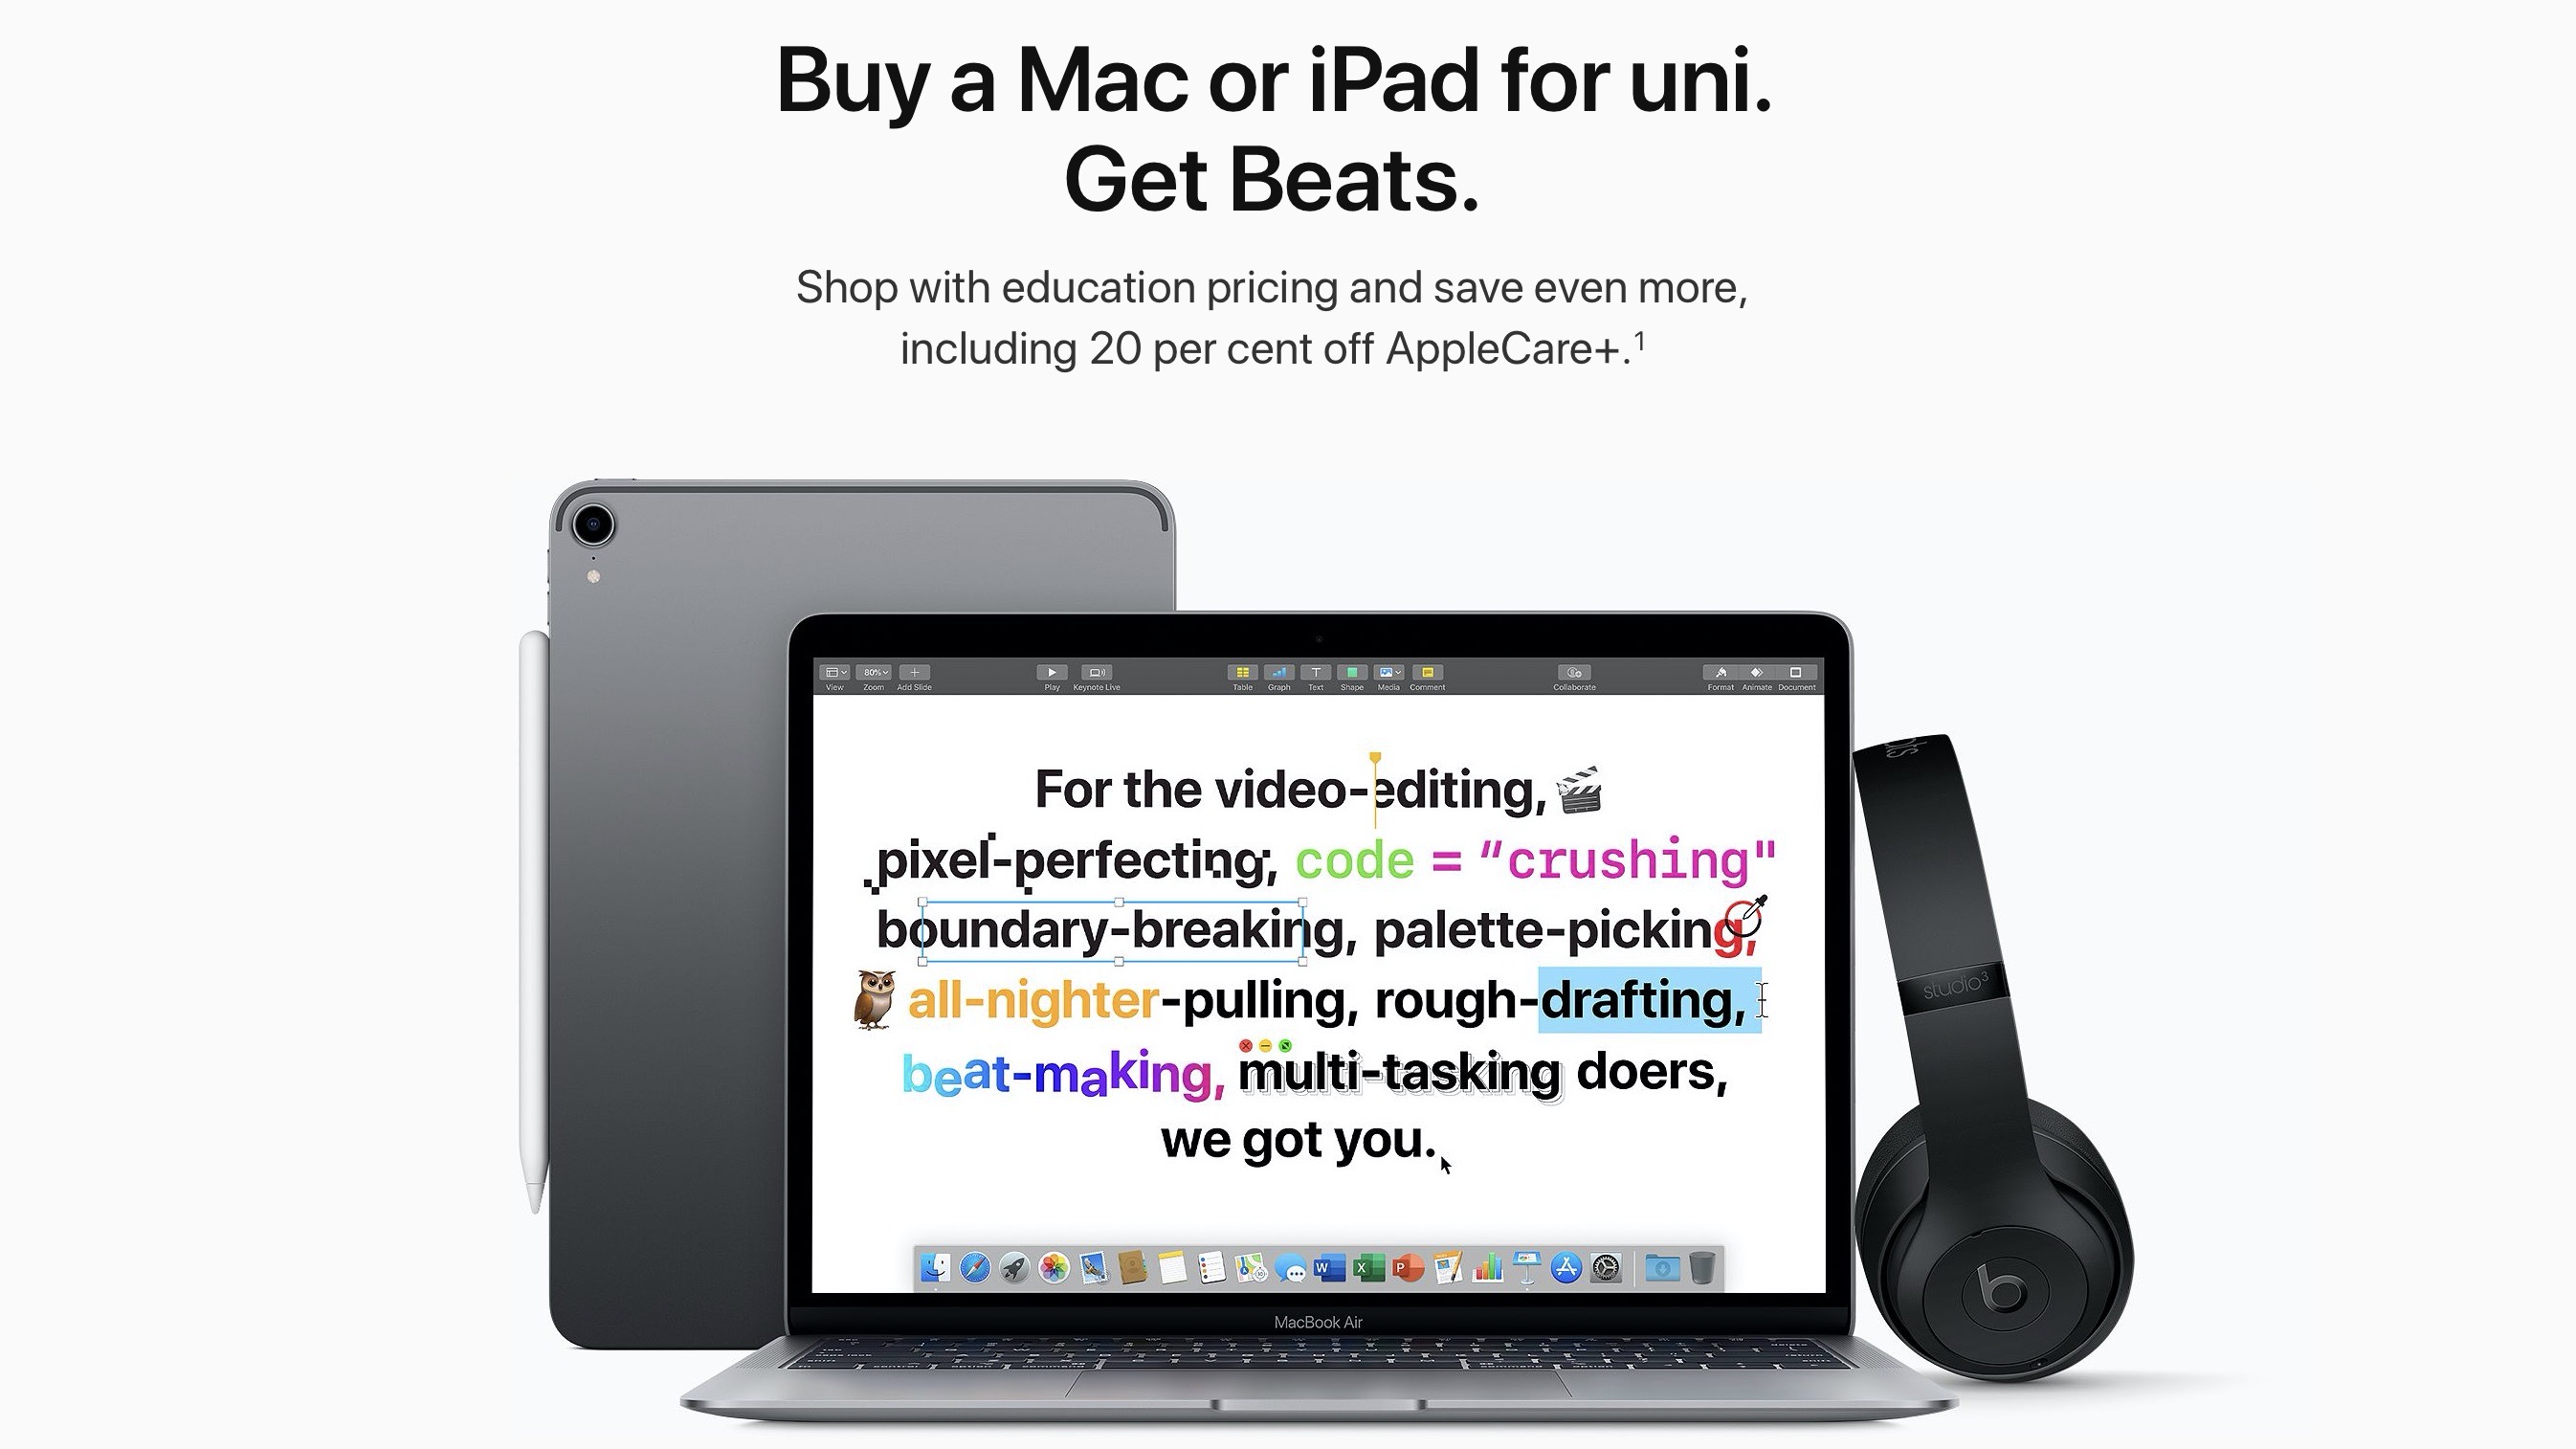 get beats for free with mac